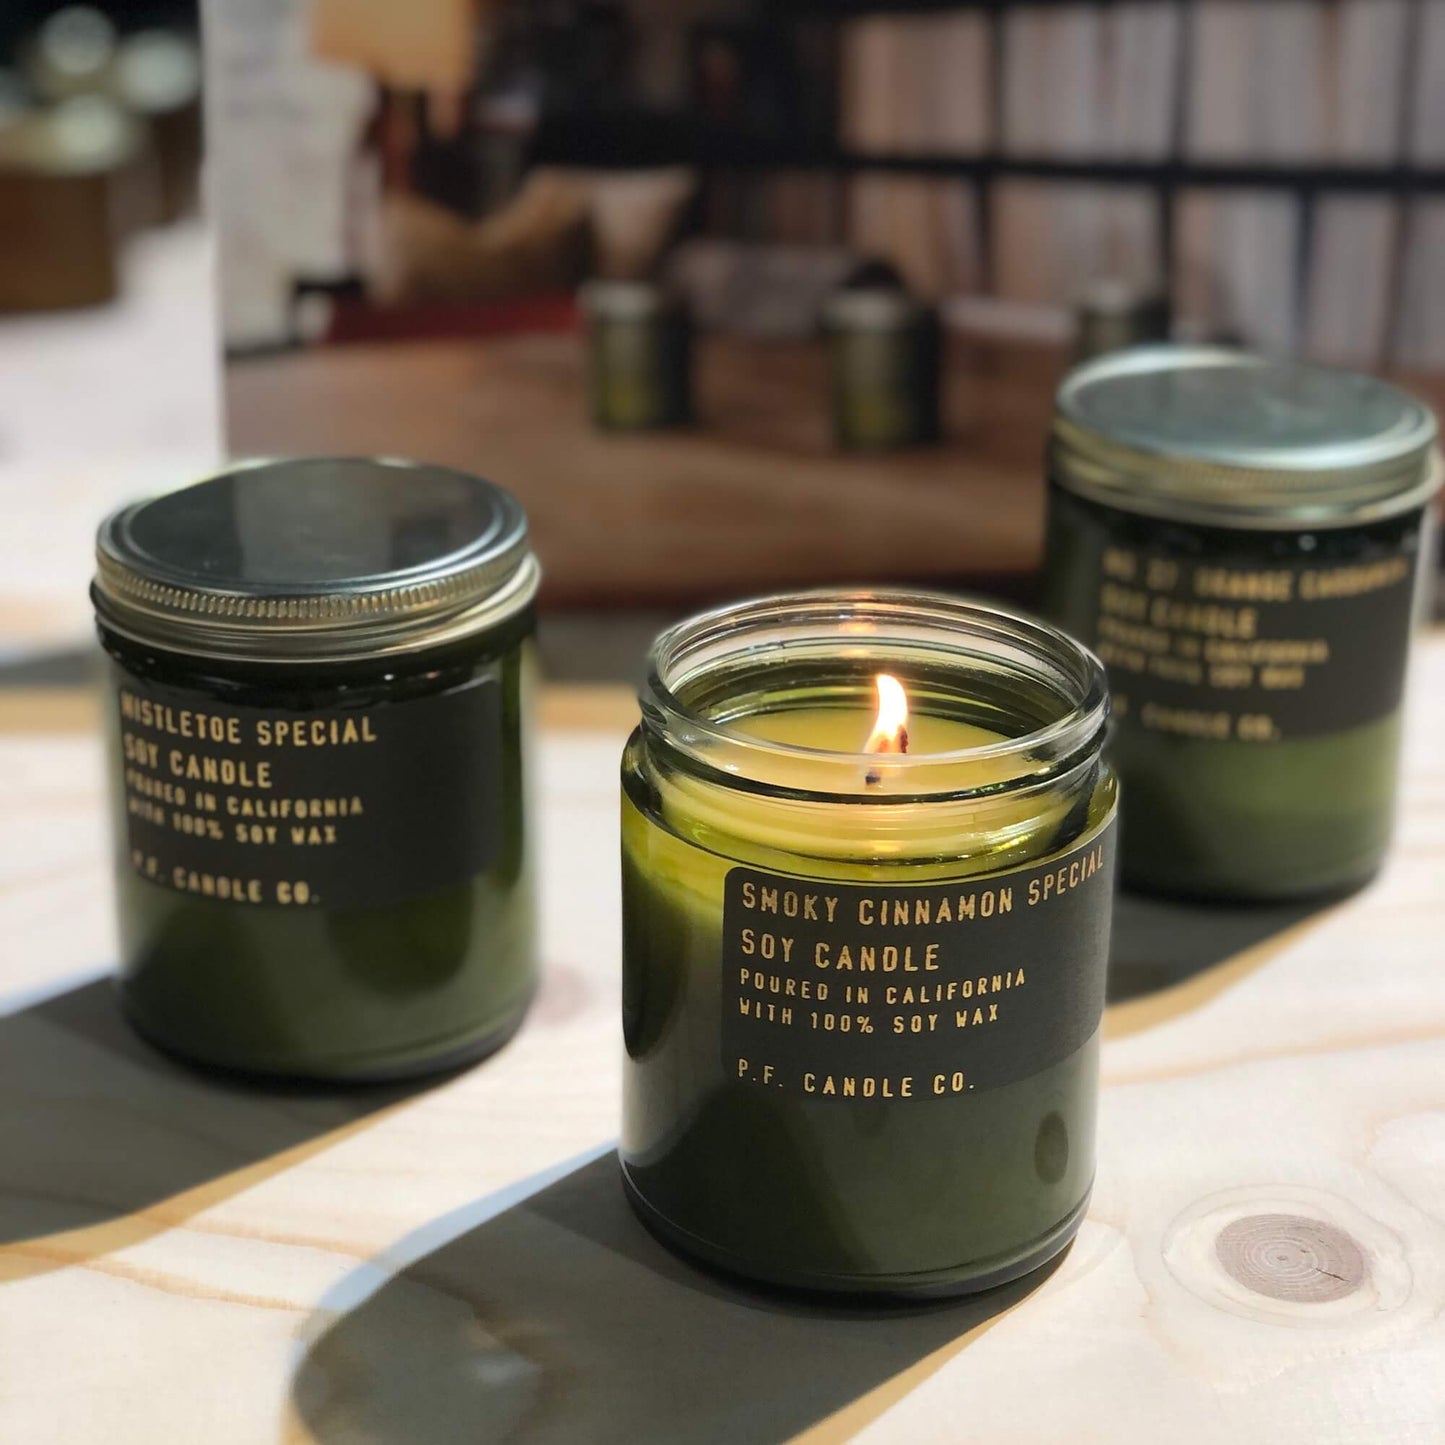 Smoky Cinnamon Special - Limited Edition - P.F. Candle Co